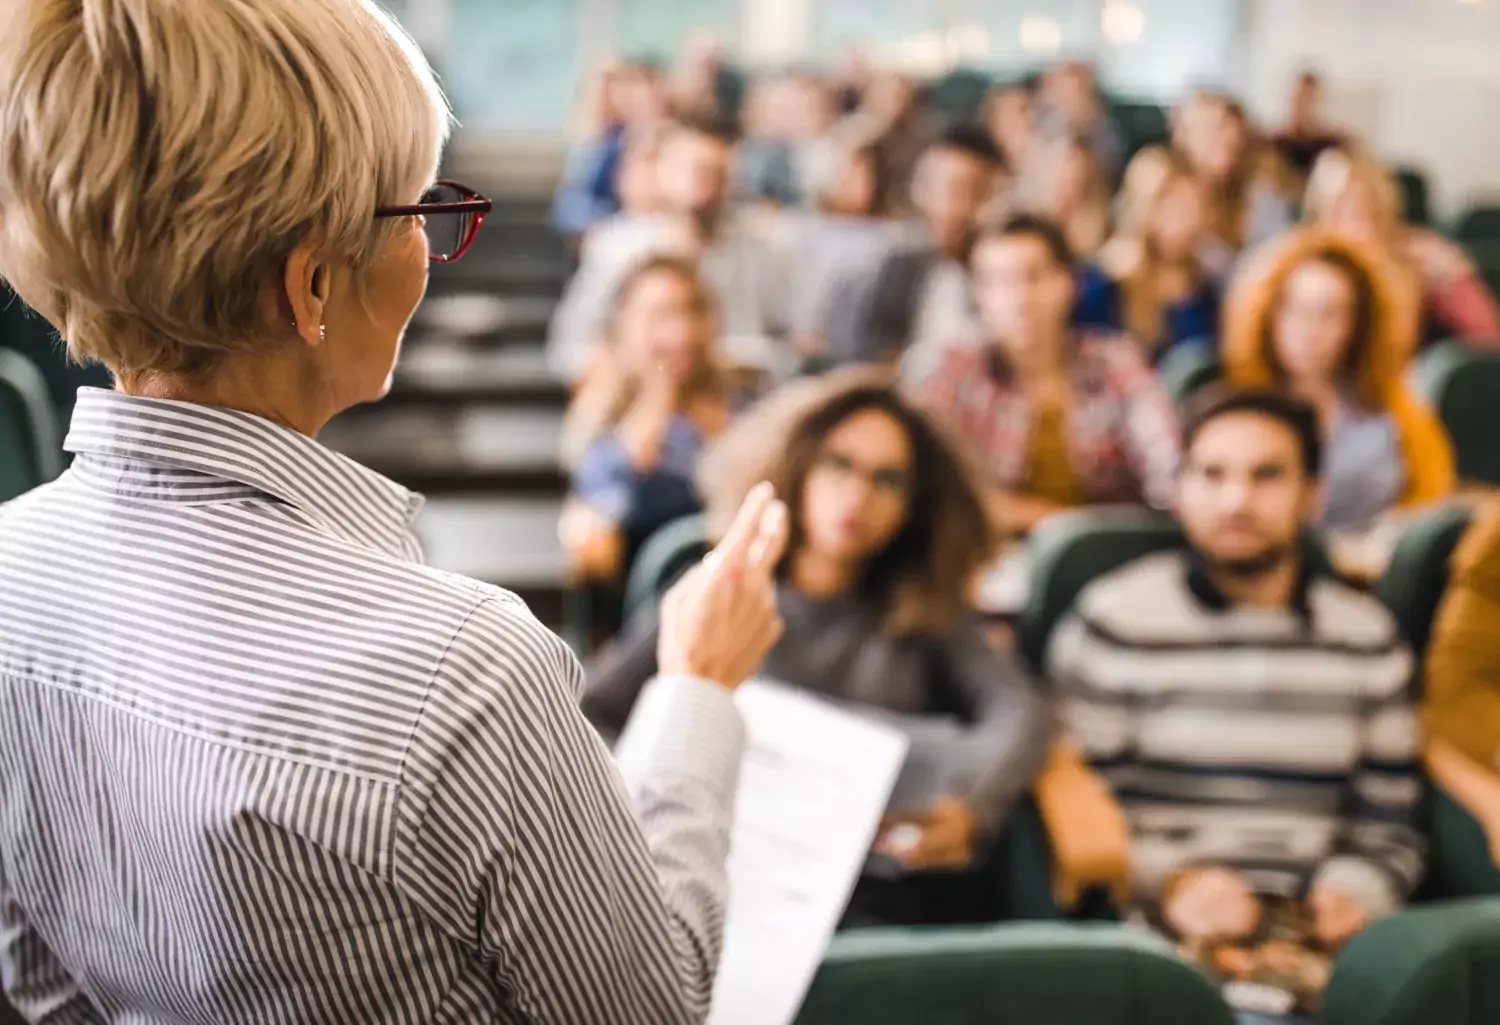 A woman presenting for a class